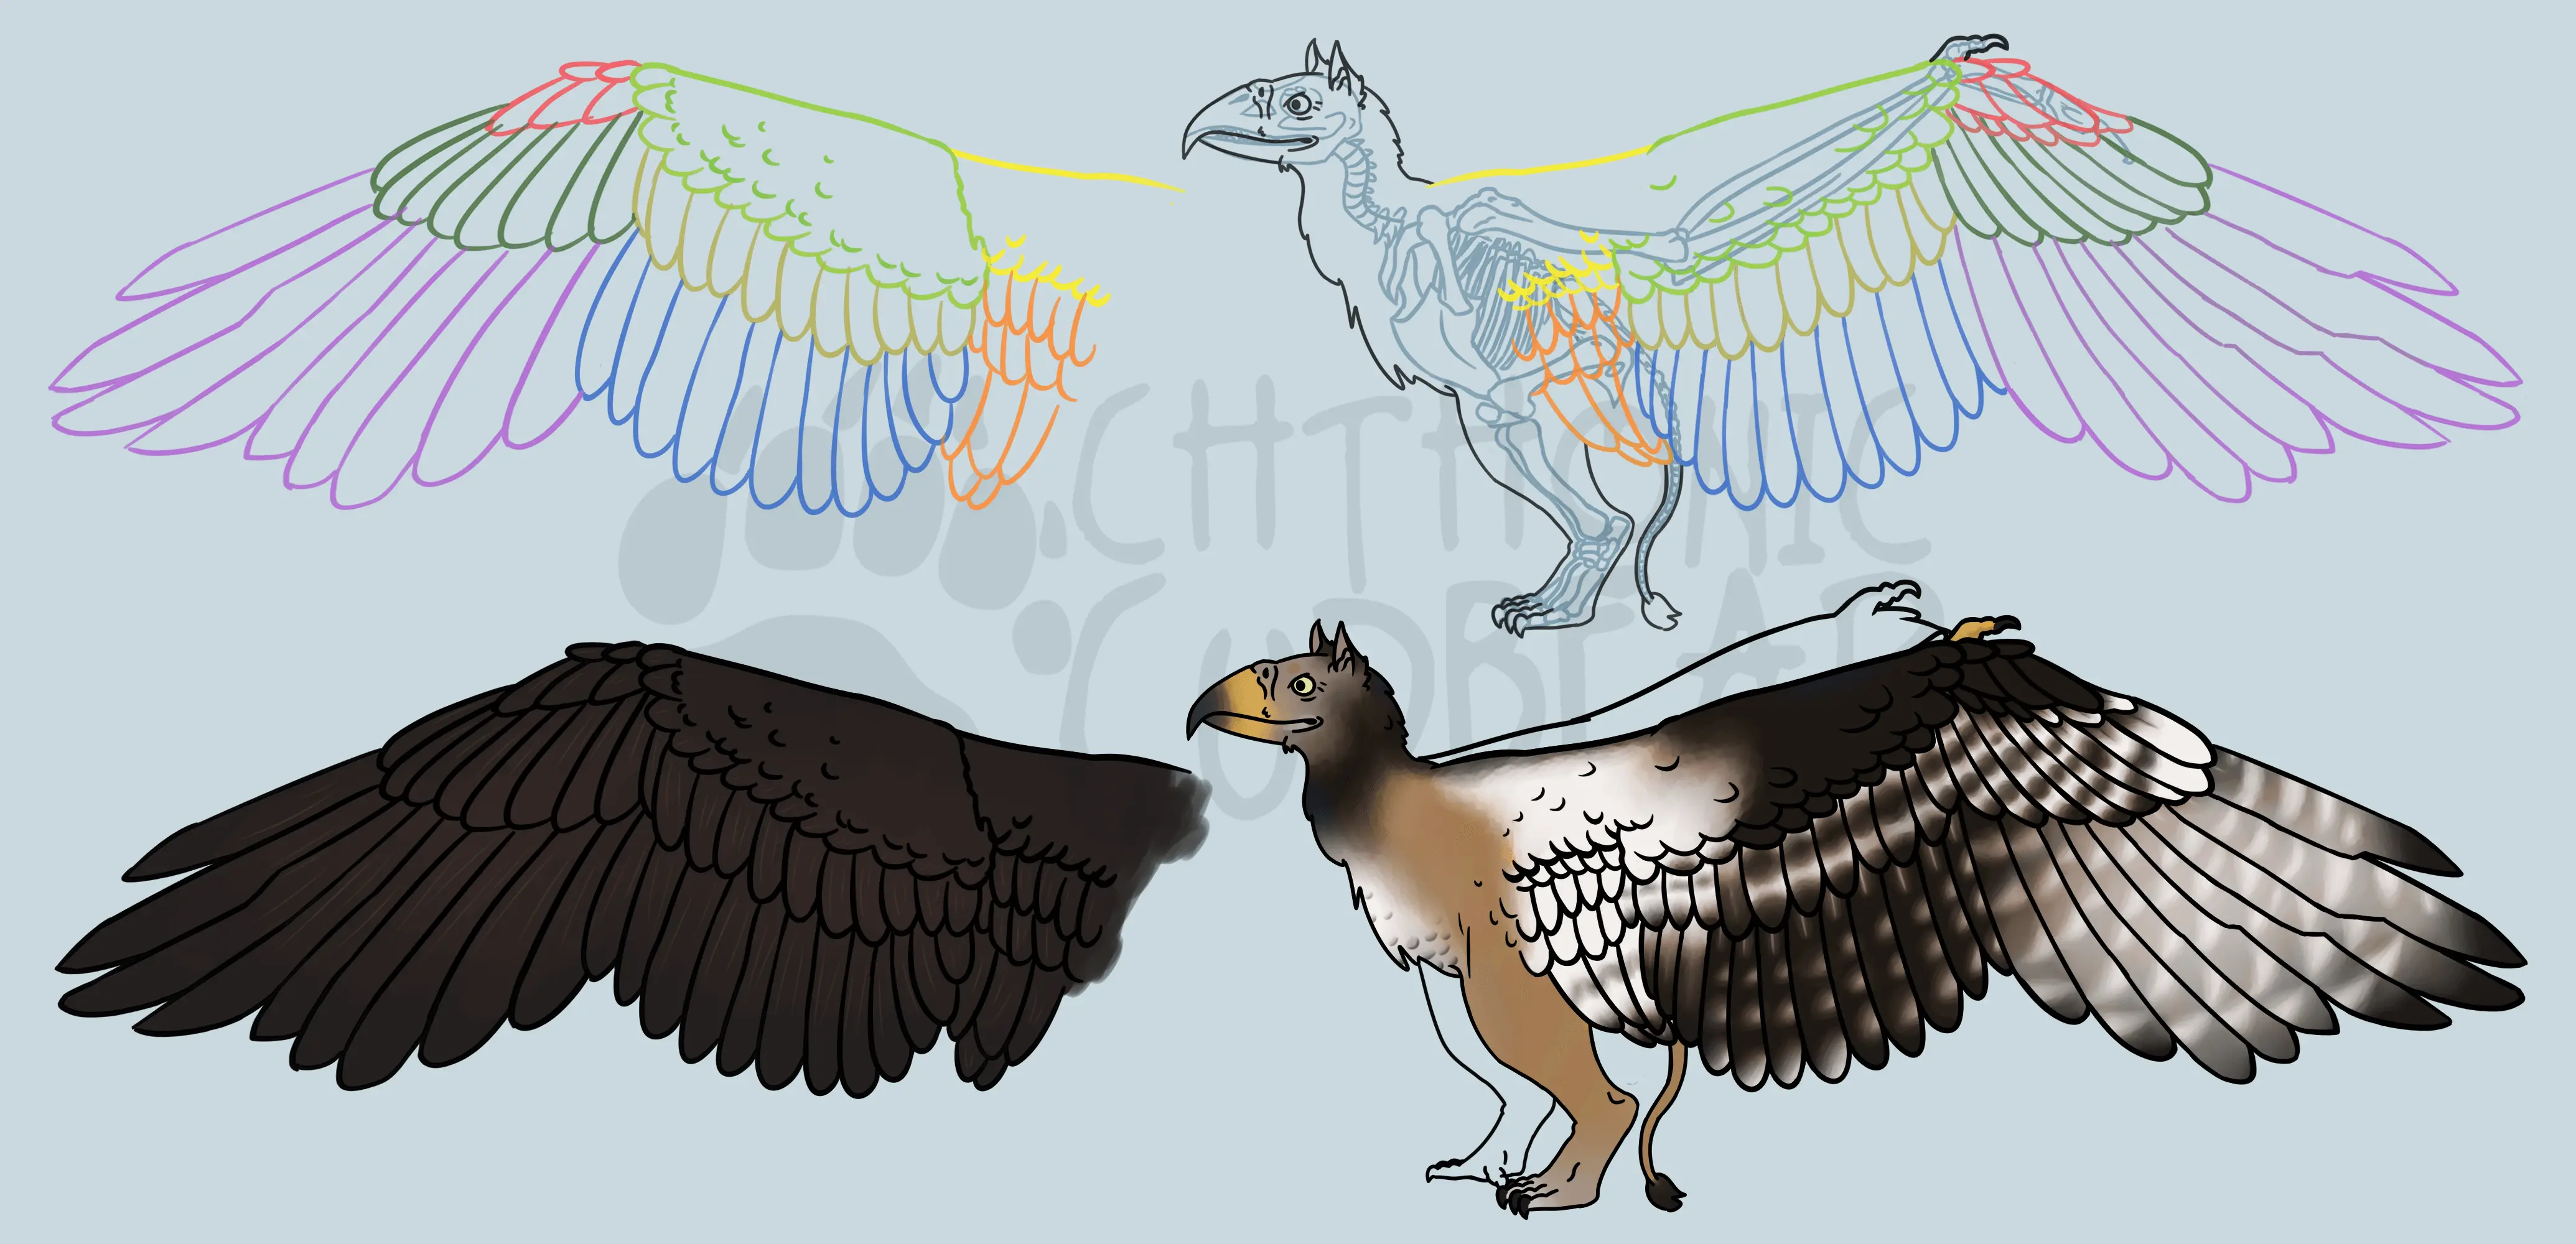 Illustration of a lion-footed bird, showcasing its wings and its bones in an anatomy educative transparent way.